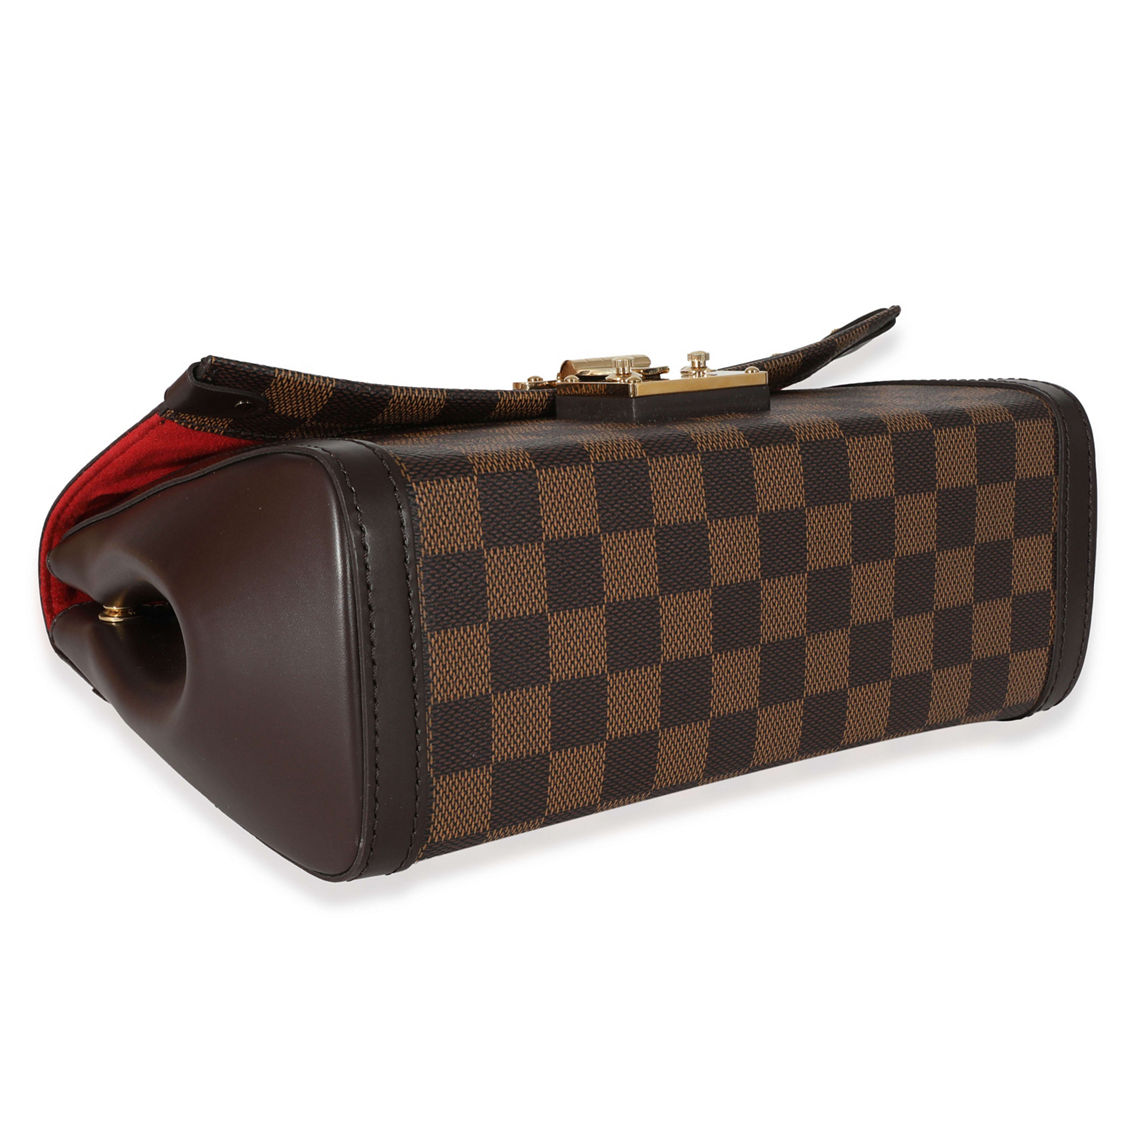 Louis Vuitton Venice Pre-Owned - Image 4 of 4